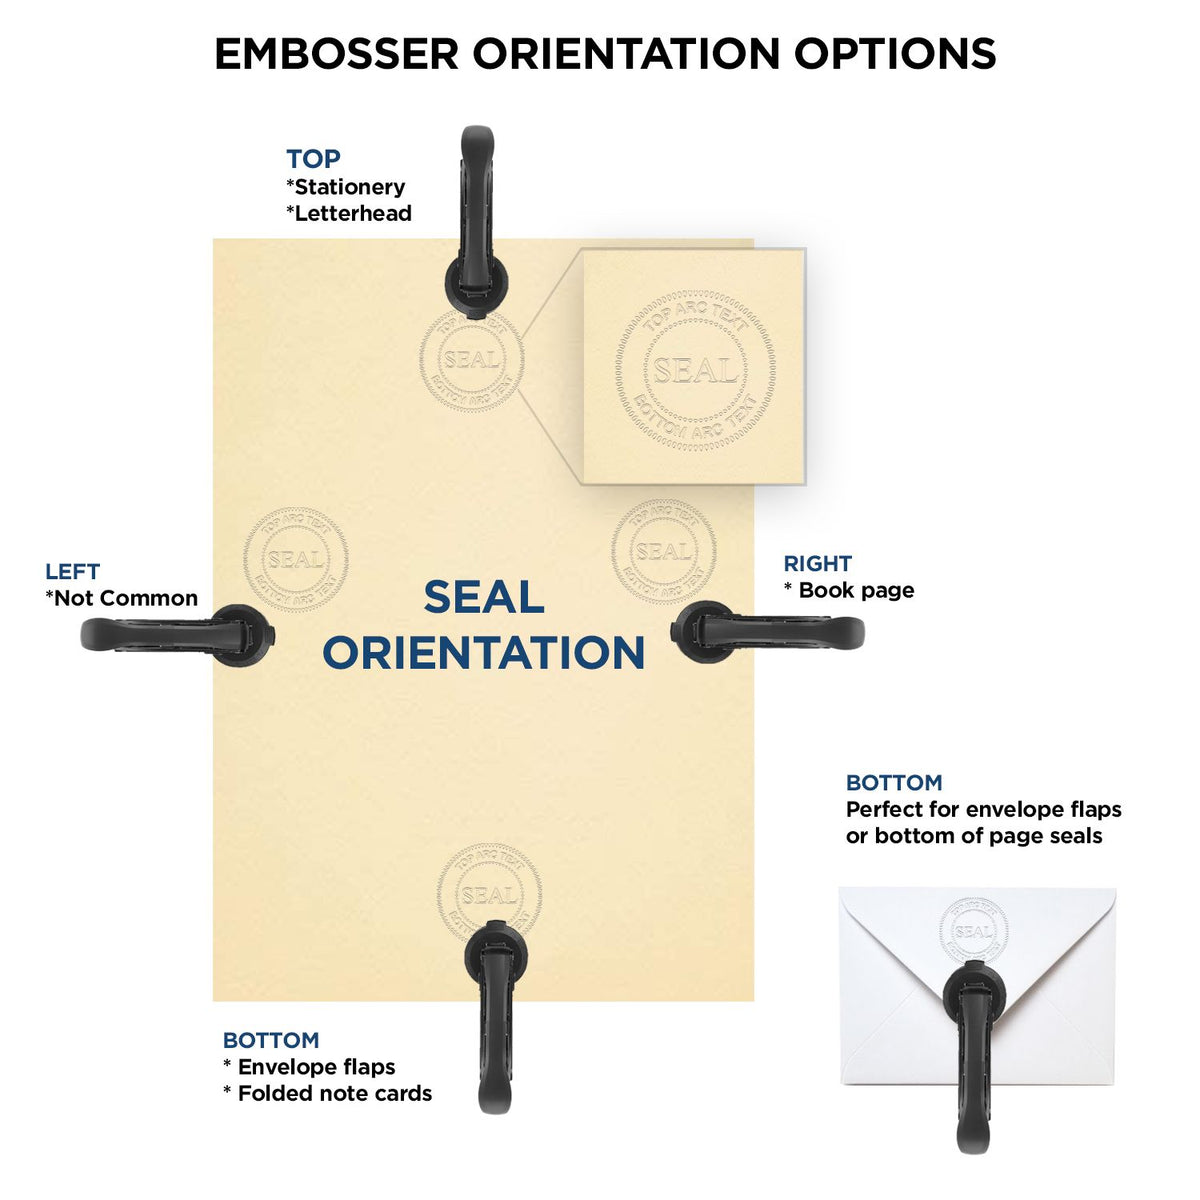 An infographic for the Long Reach Oklahoma PE Seal showing embosser orientation, this is showing examples of a top, bottom, right and left insert.